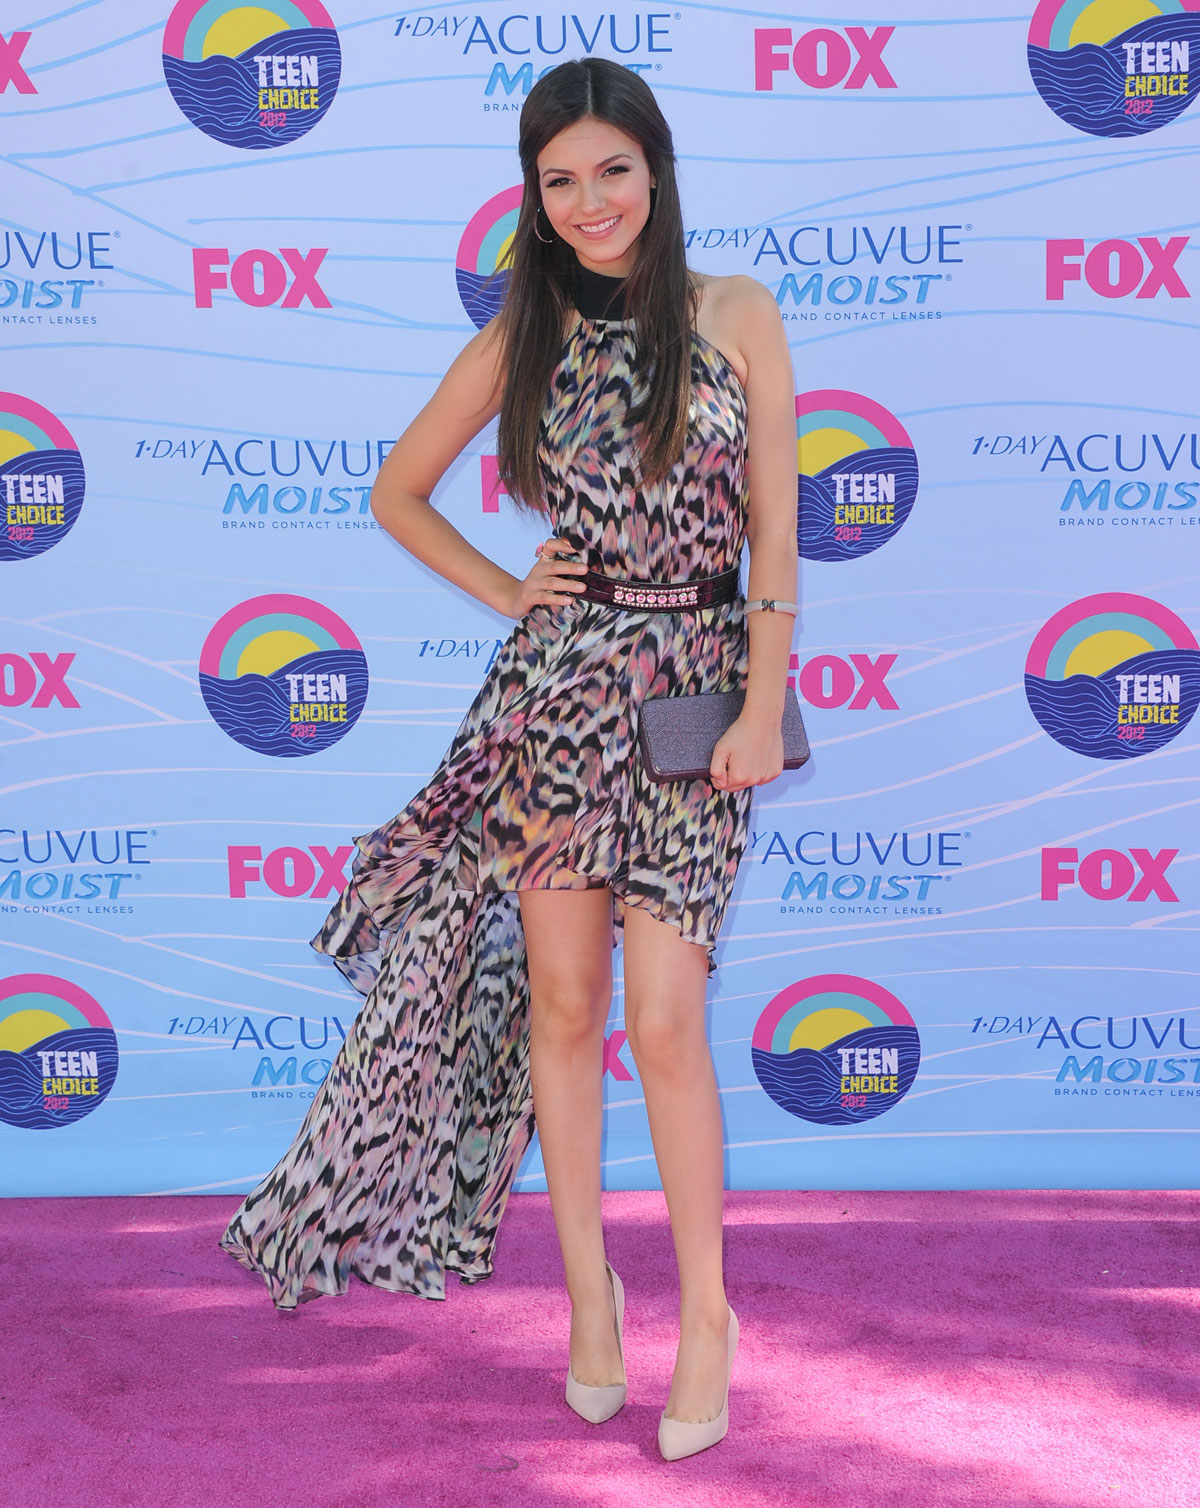 VICTORIA JUSTICE at 2012 Teen Choice Awards in Universal City - HawtCelebs